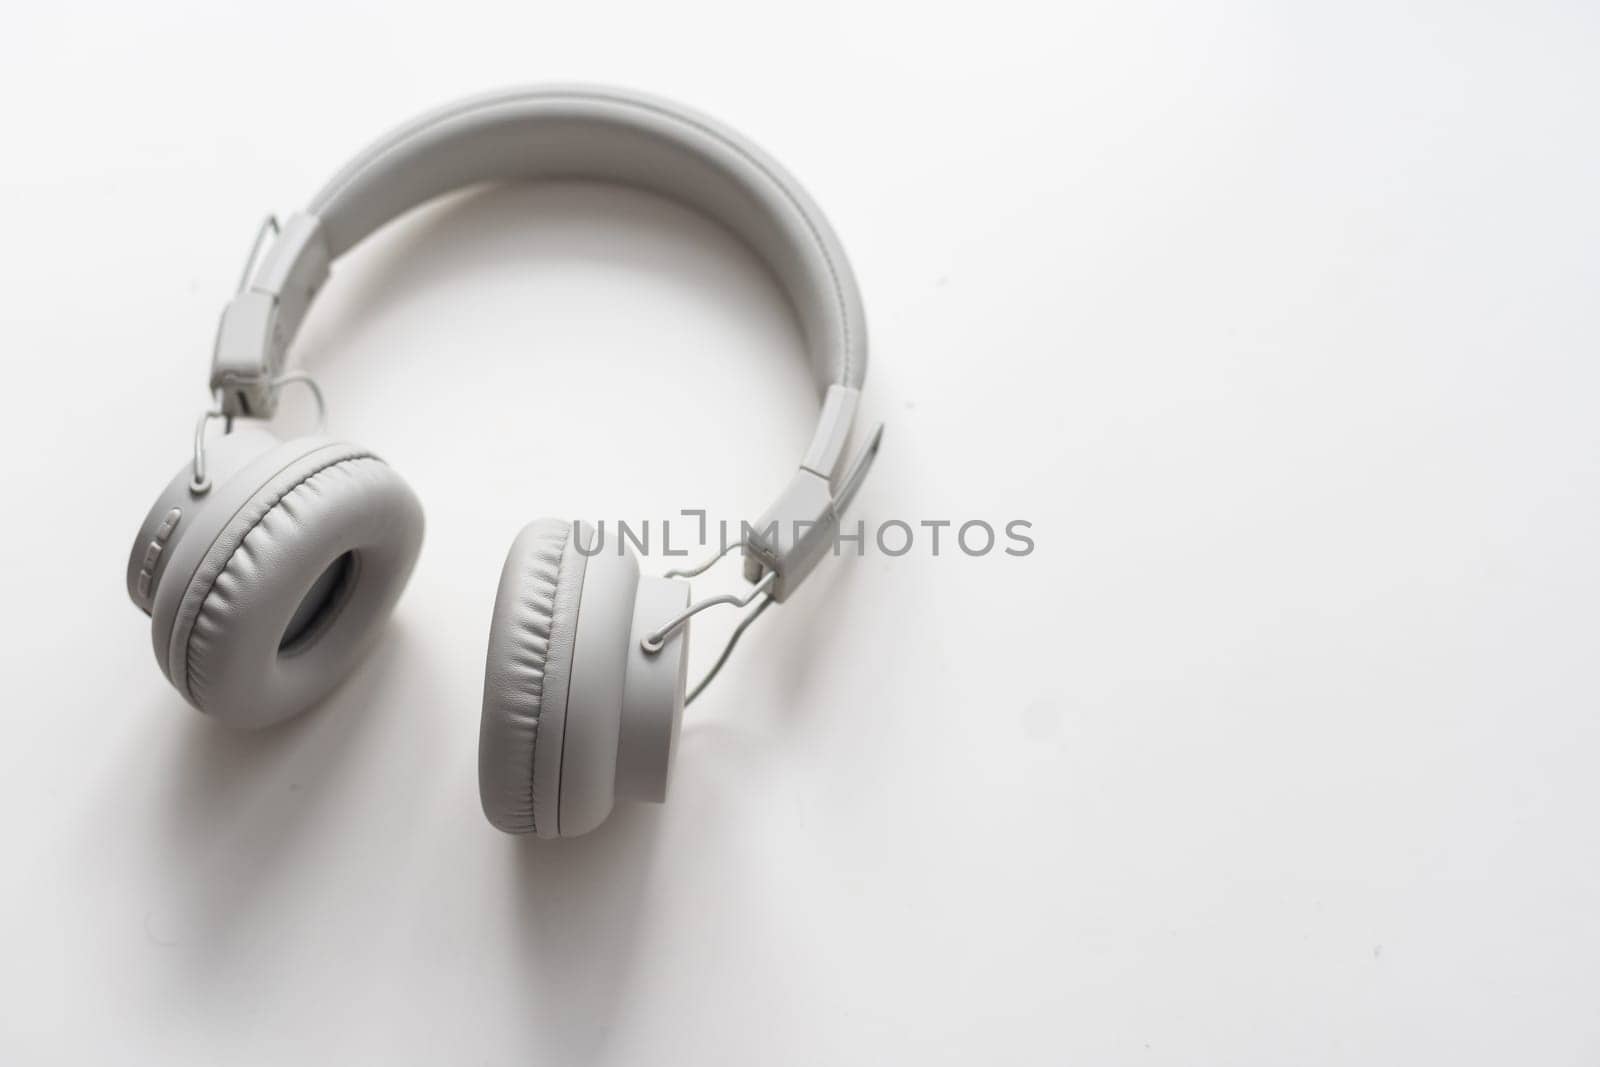 Gray wireless headphones on white background isolated close up, grey headset with big leather ear pad cushions design, modern black wi-fi stereo sound earphones side view, audio music device. High quality photo